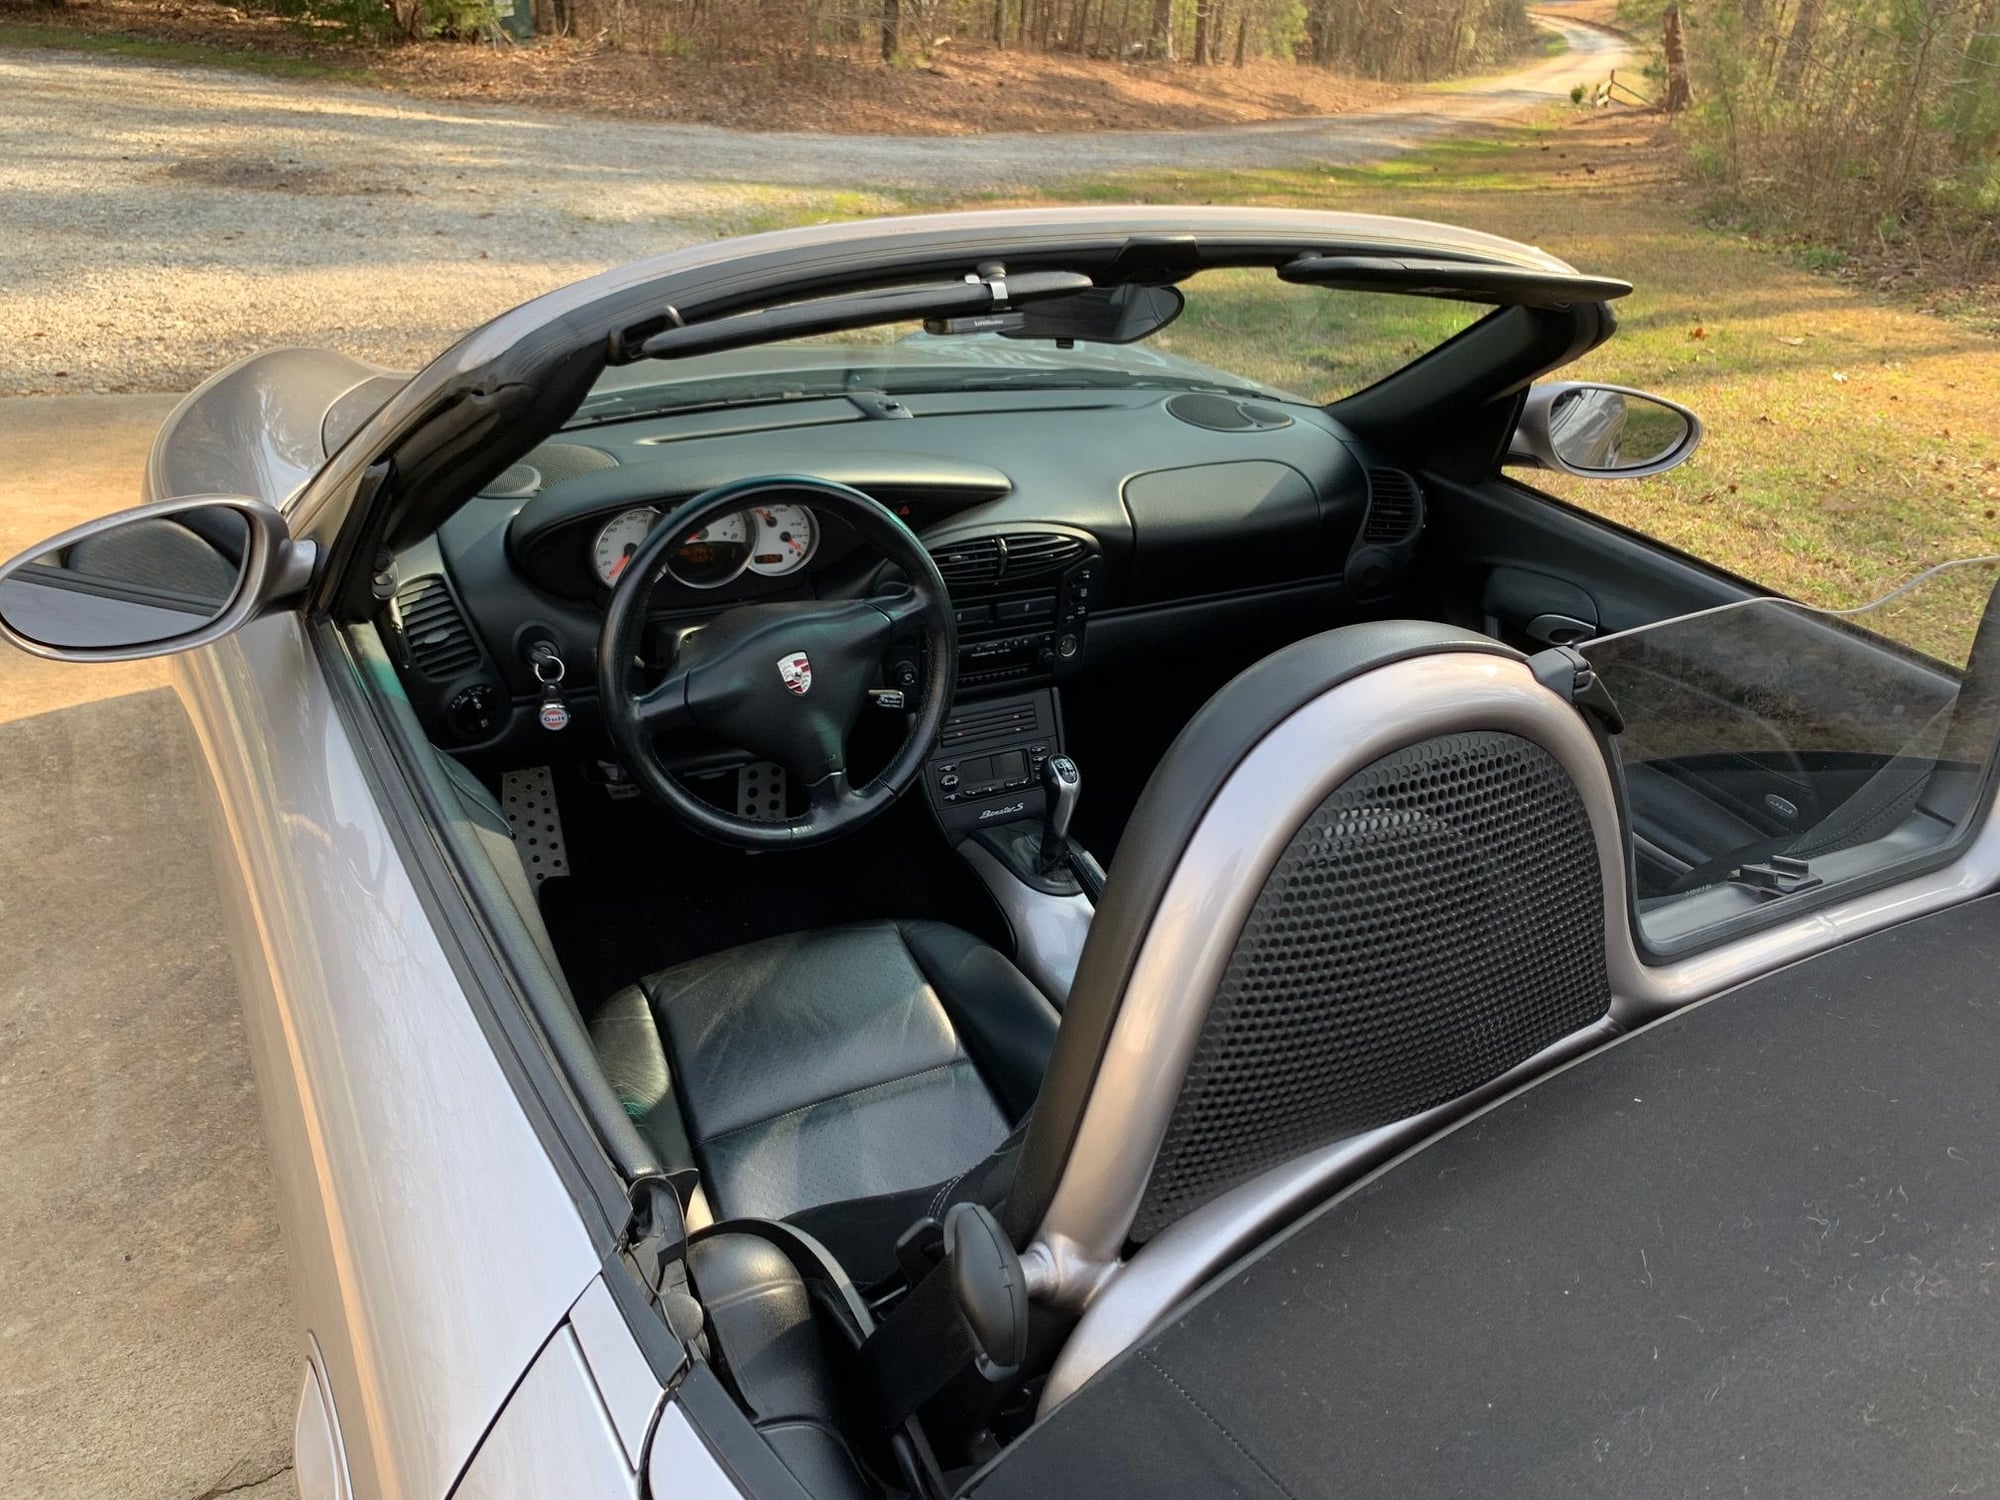 2001 Porsche Boxster - 2001 Boxster S 6-Speed Meridian Metallic 62k miles - Used - VIN WP0CB29831U665156 - 62,000 Miles - 6 cyl - 2WD - Manual - Convertible - Other - Easley, SC 29640, United States